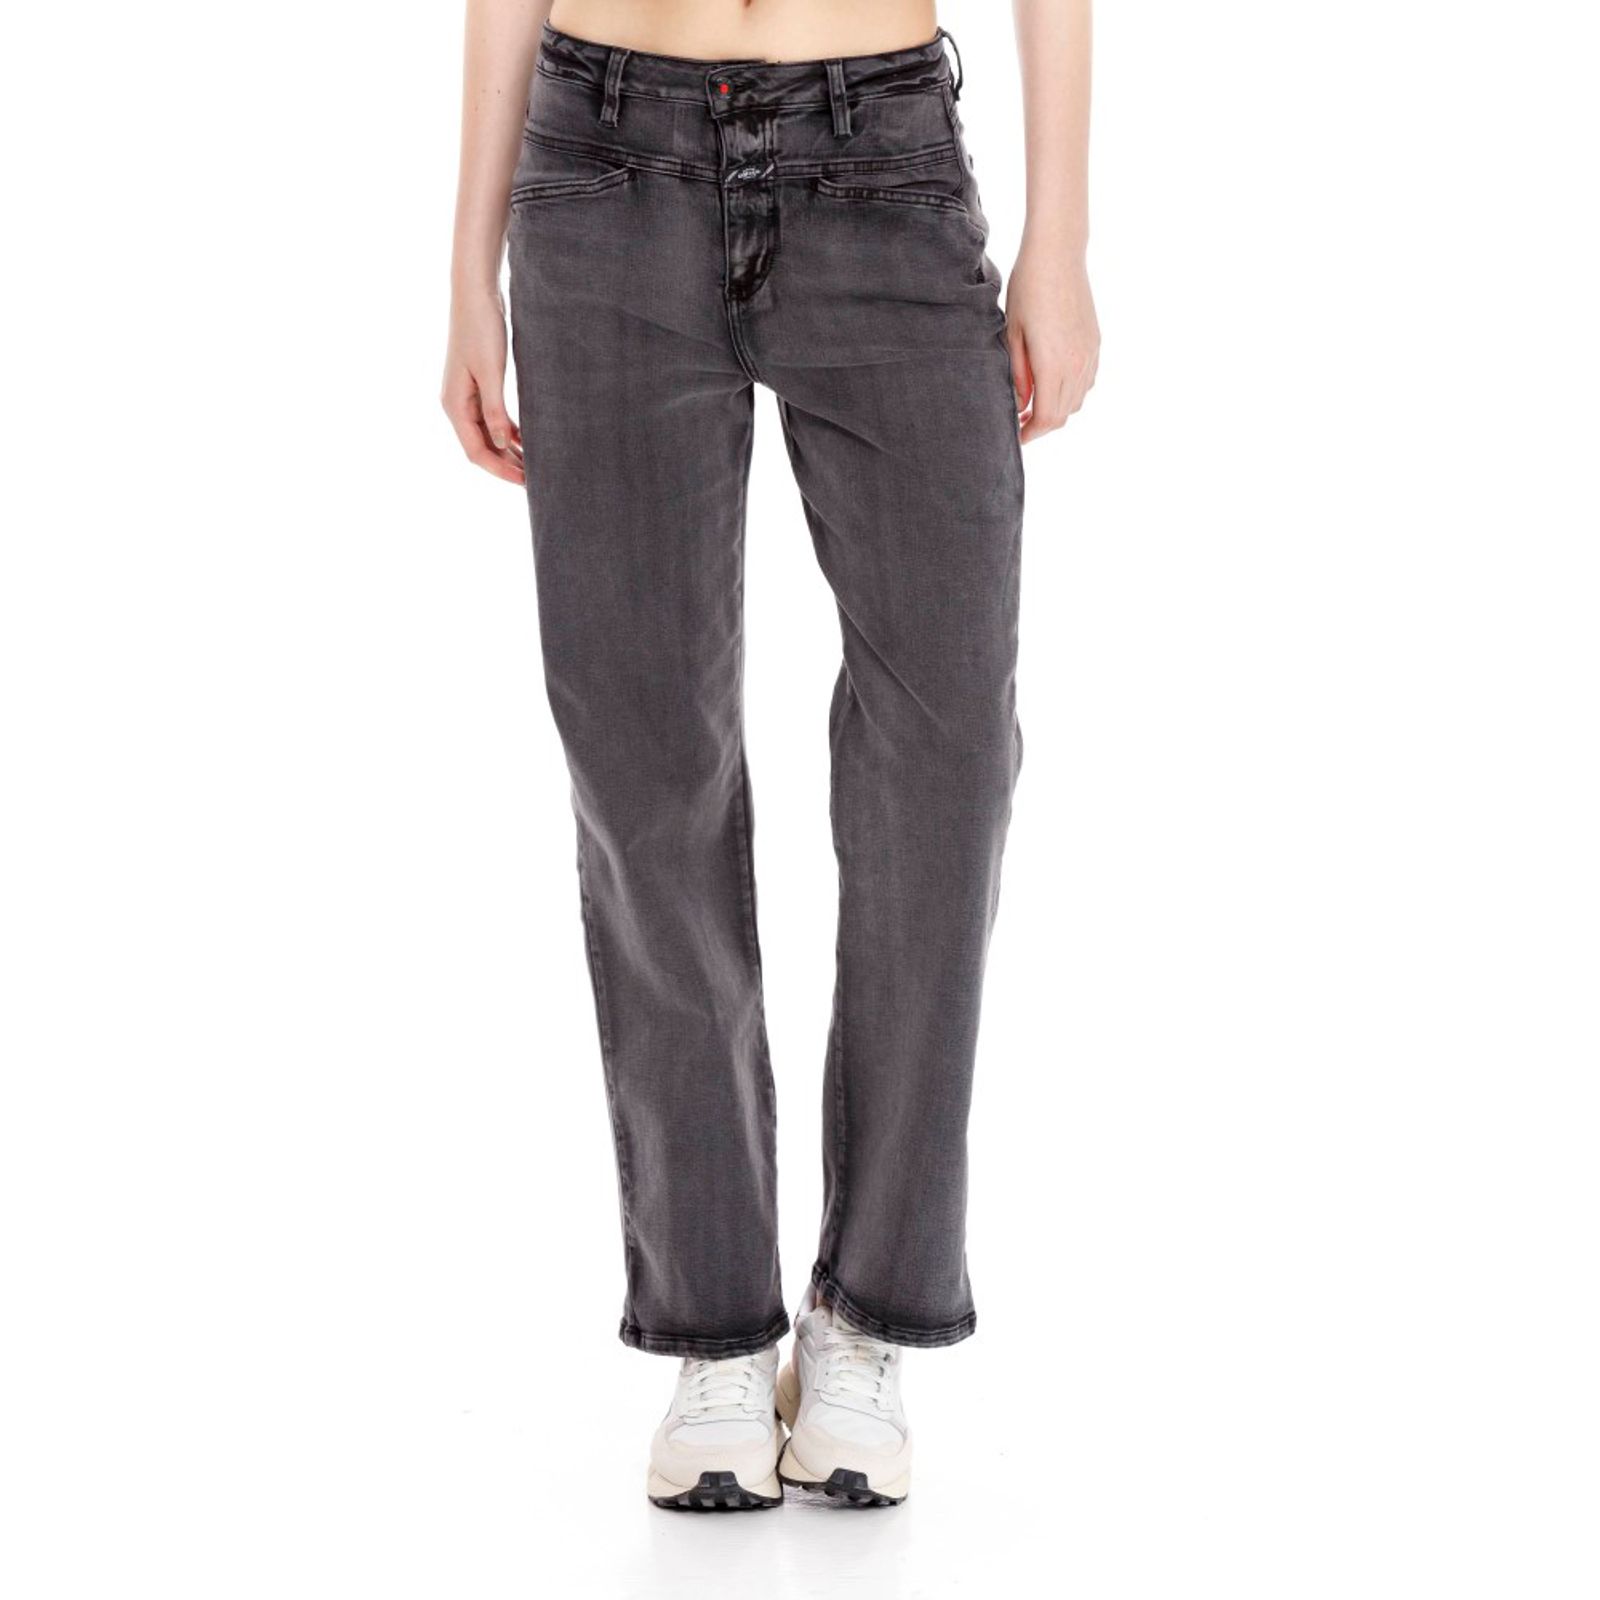 Jean Stretch Para Mujer Jean Pedal 3045, JEANS